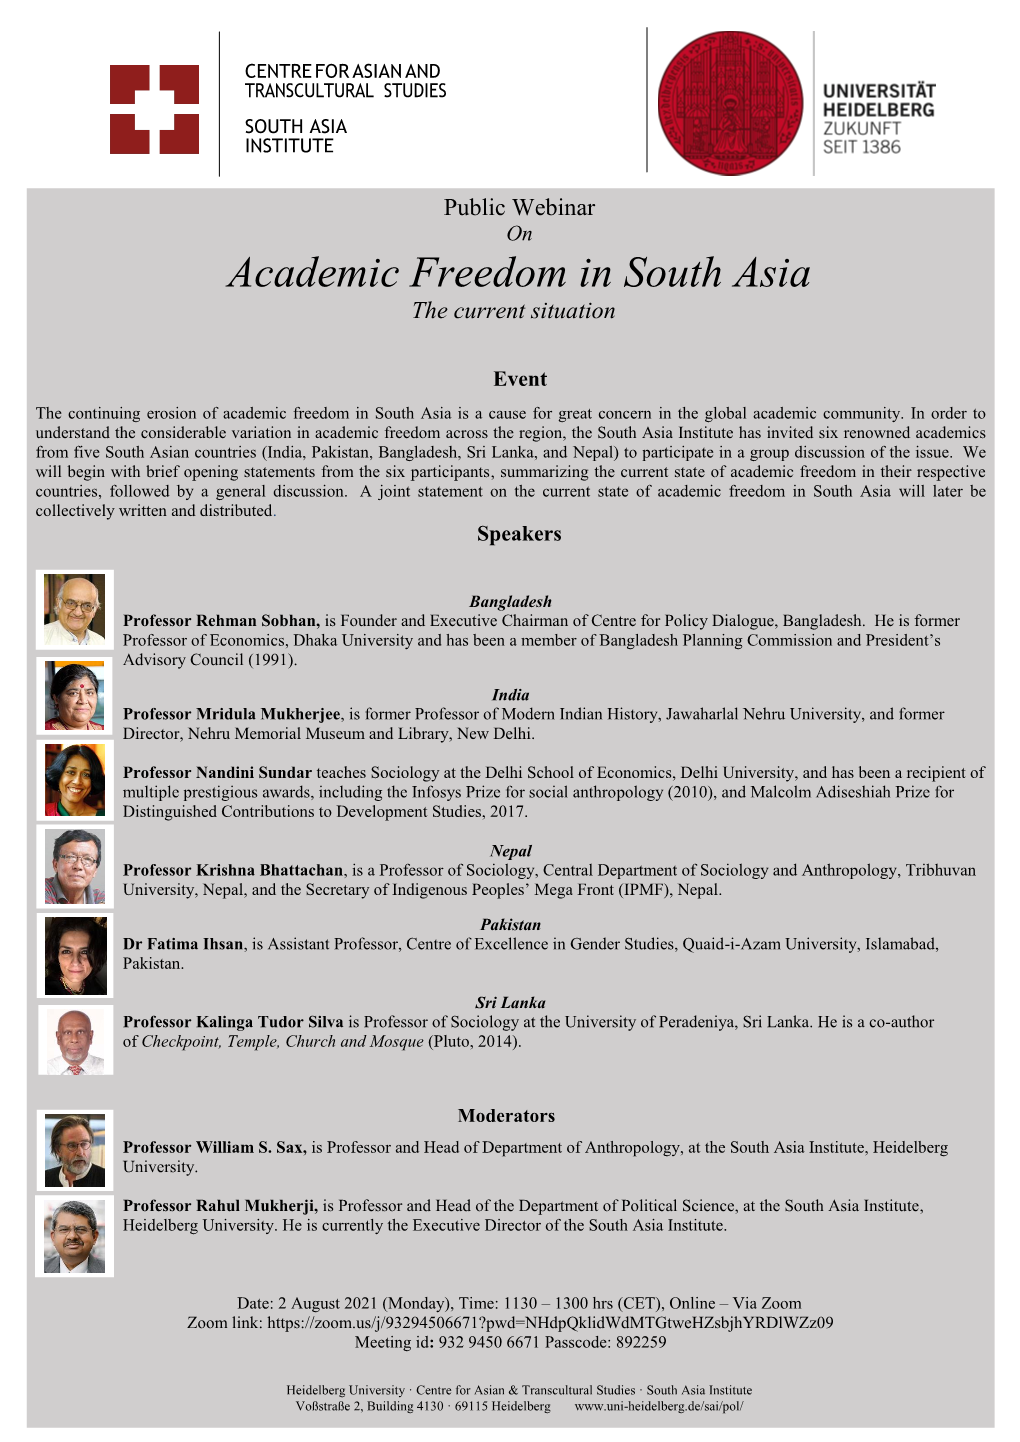 Academic Freedom in South Asia the Current Situation